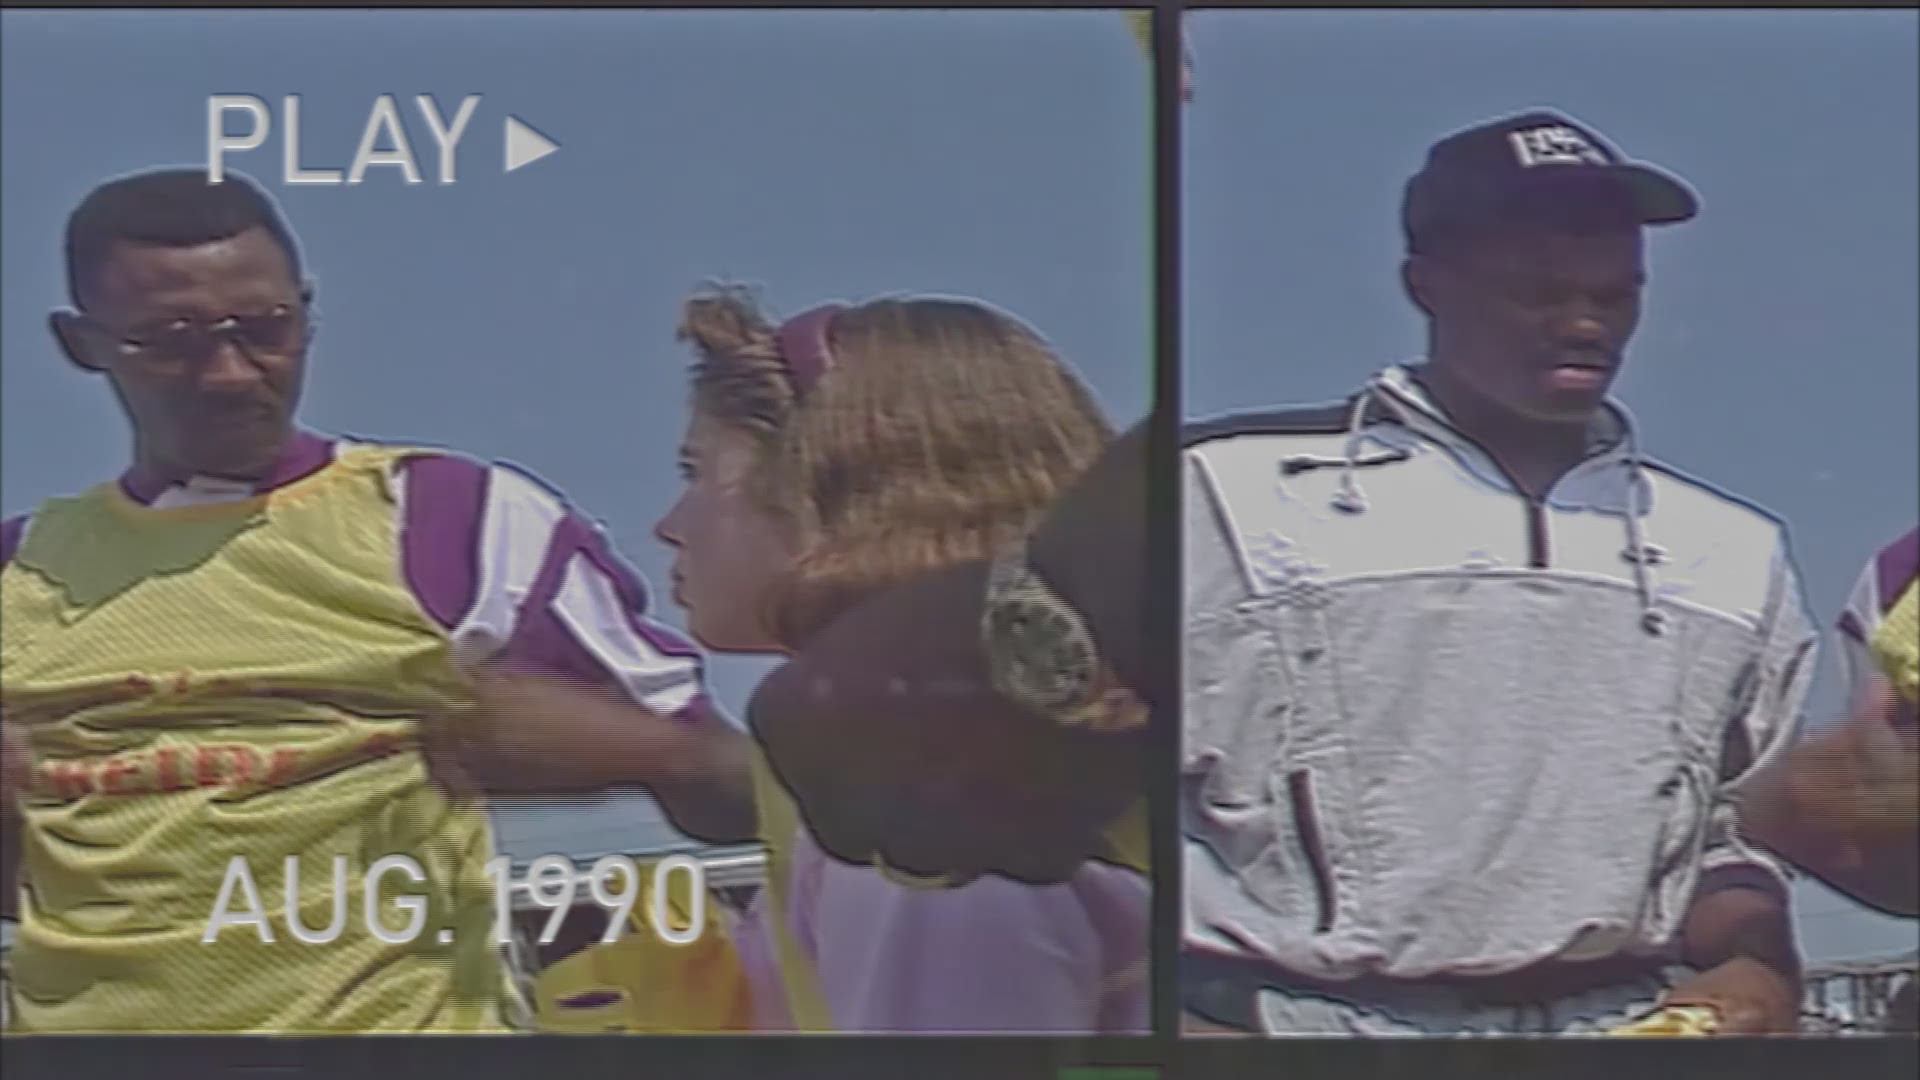 San Antonio Spurs players David Robinson and Willie Anderson show up to offer their help in the August 1990 search for 11-year-old Heidi Seeman.